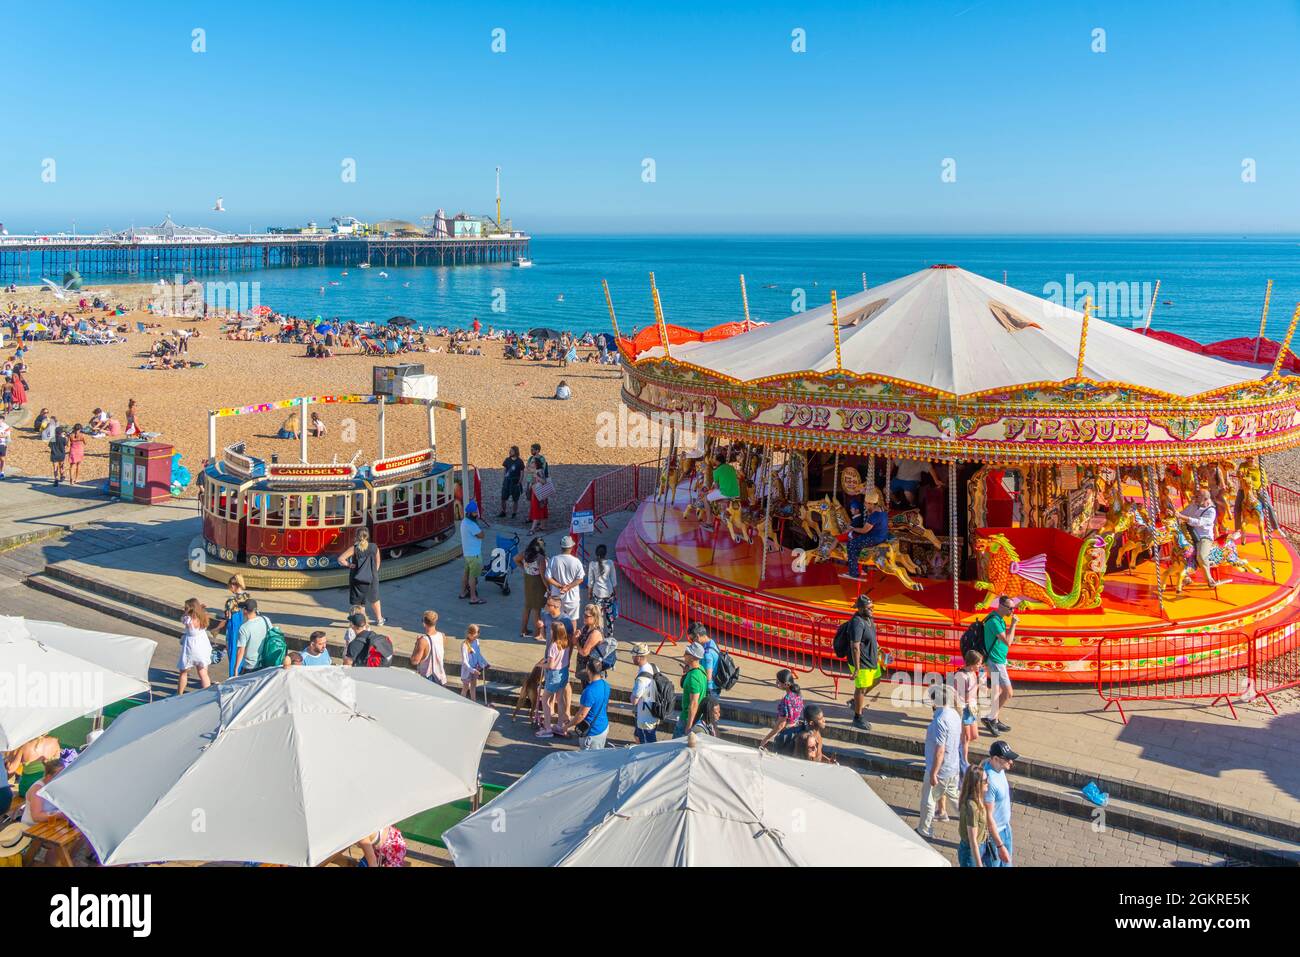 View of sea front carousel and Brighton Palace Pier, Brighton, East Sussex, England, United Kingdom, Europe Stock Photo